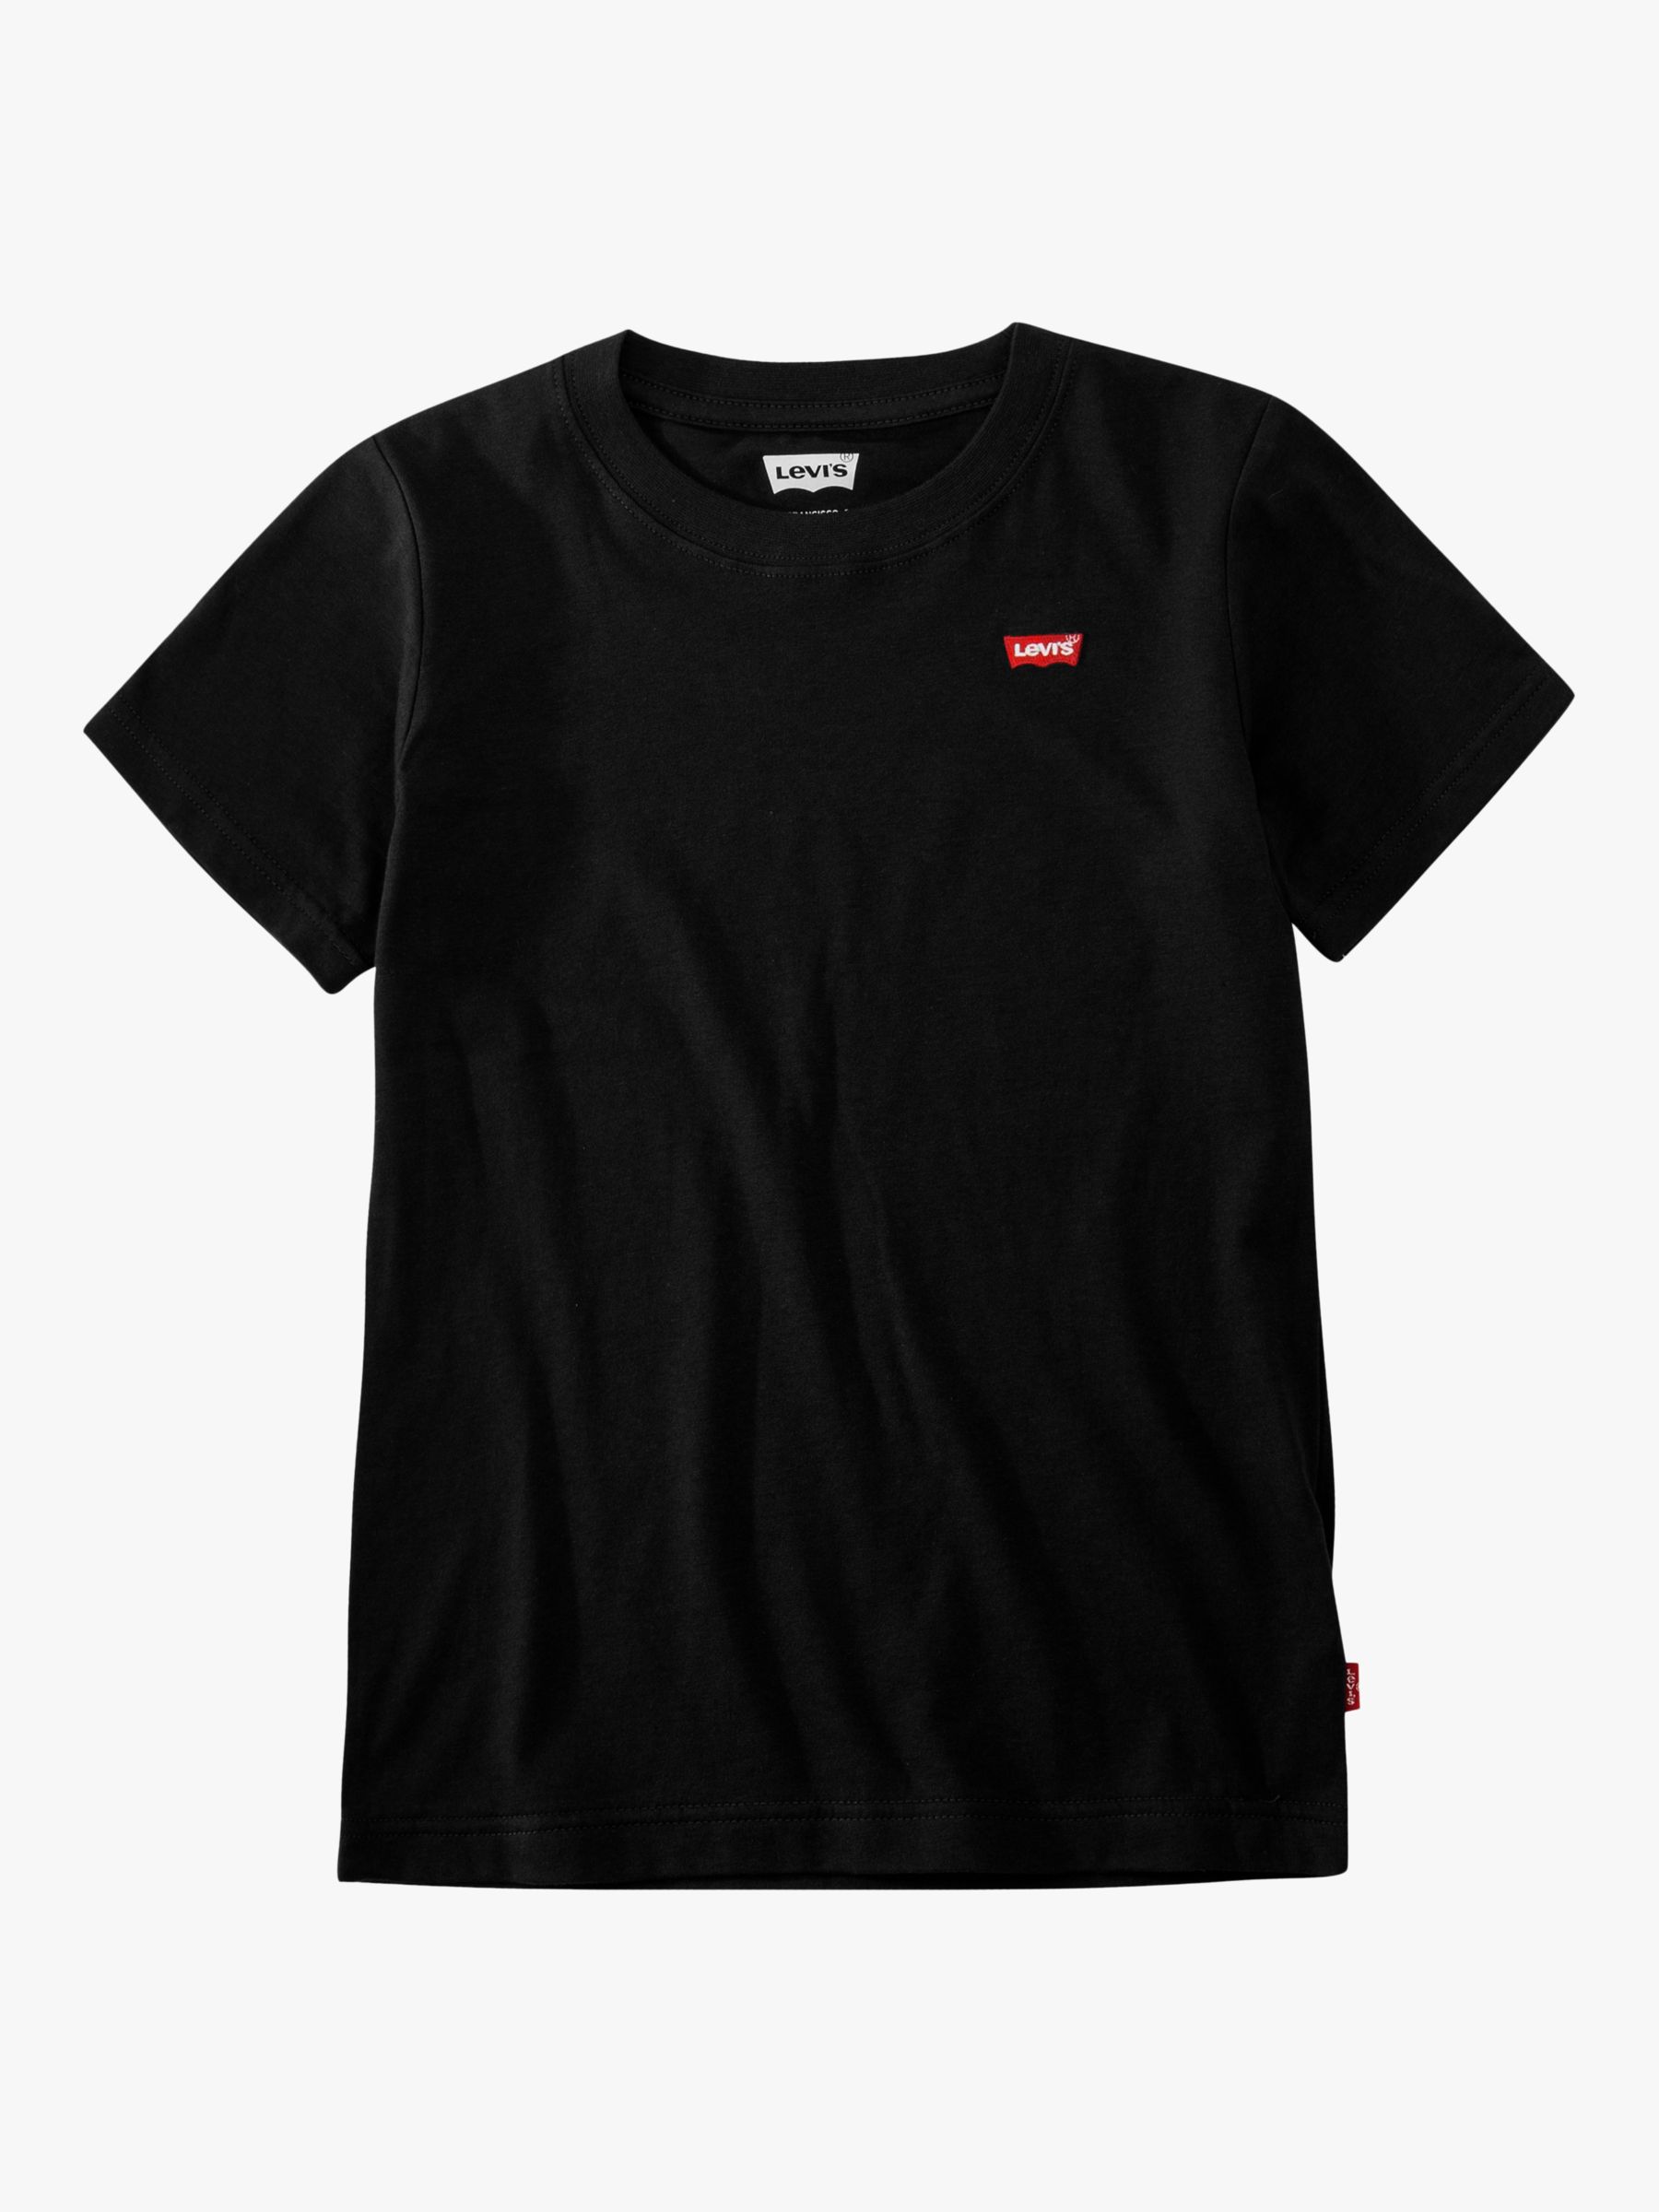 Image of Levis Boys Short Sleeve Batwing Embroidered Logo TShirt